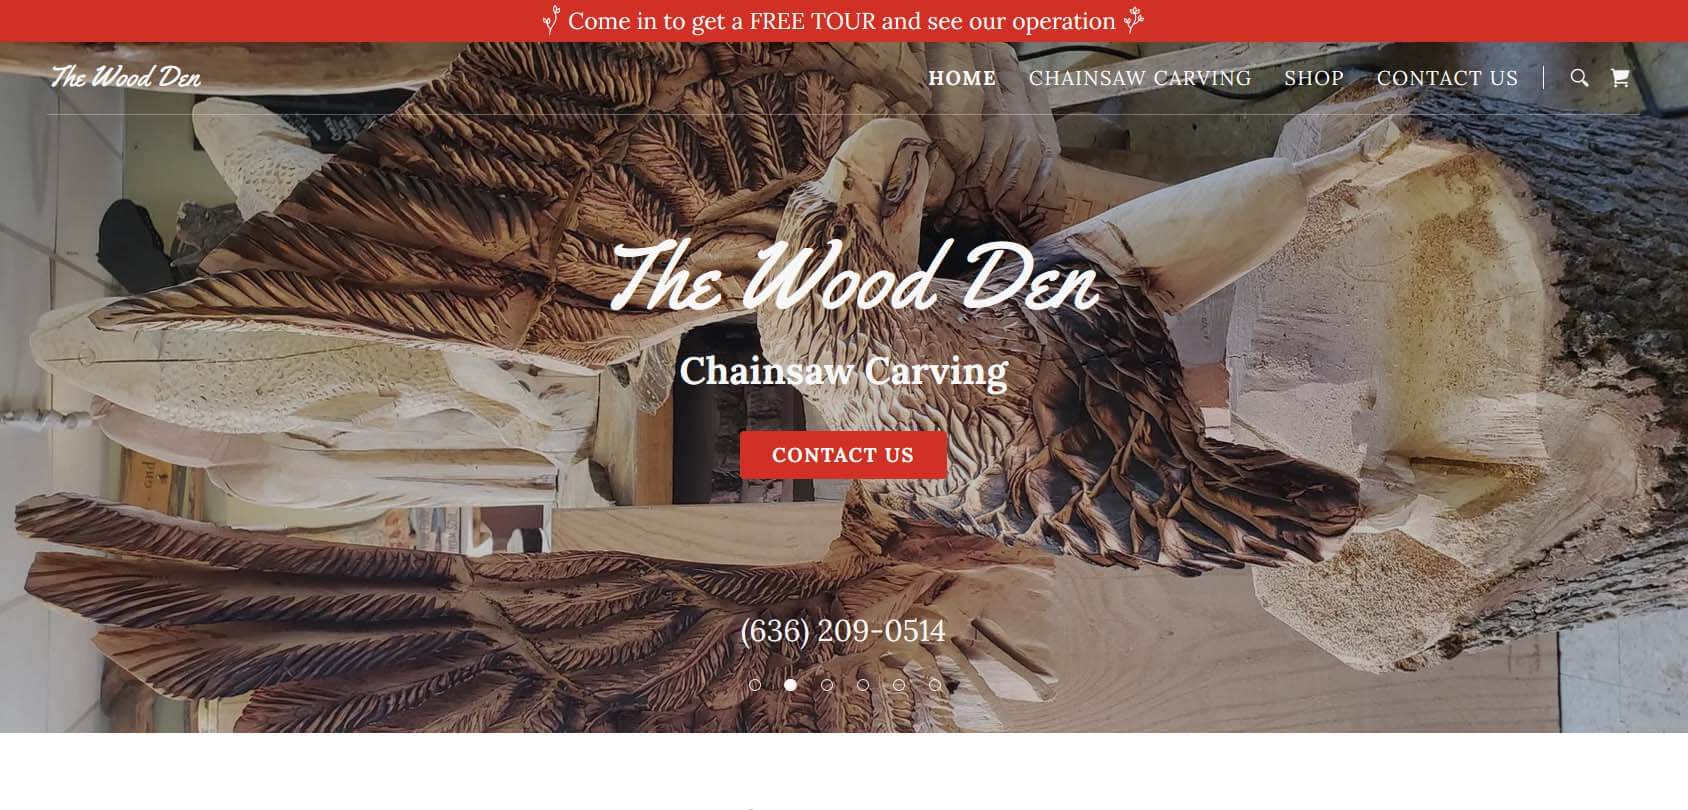 The Wood Den Homepage